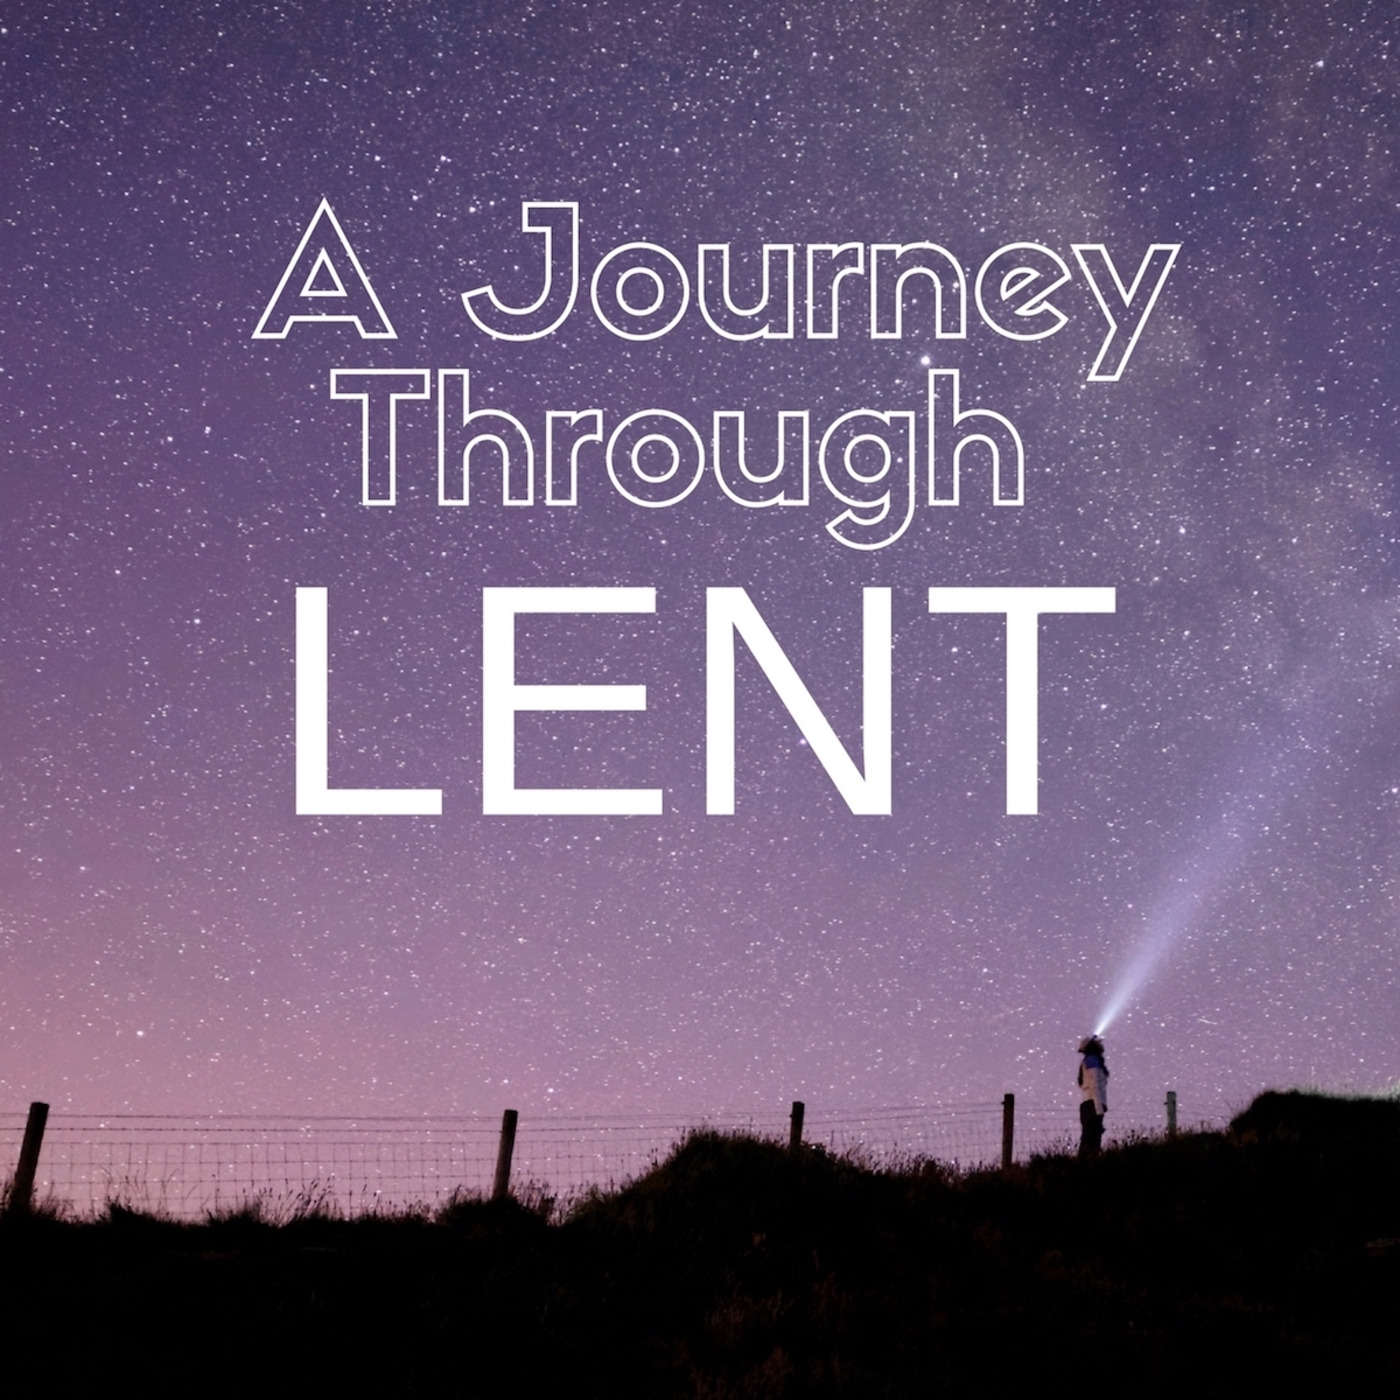 12 The Second Sunday in the Season of Lent